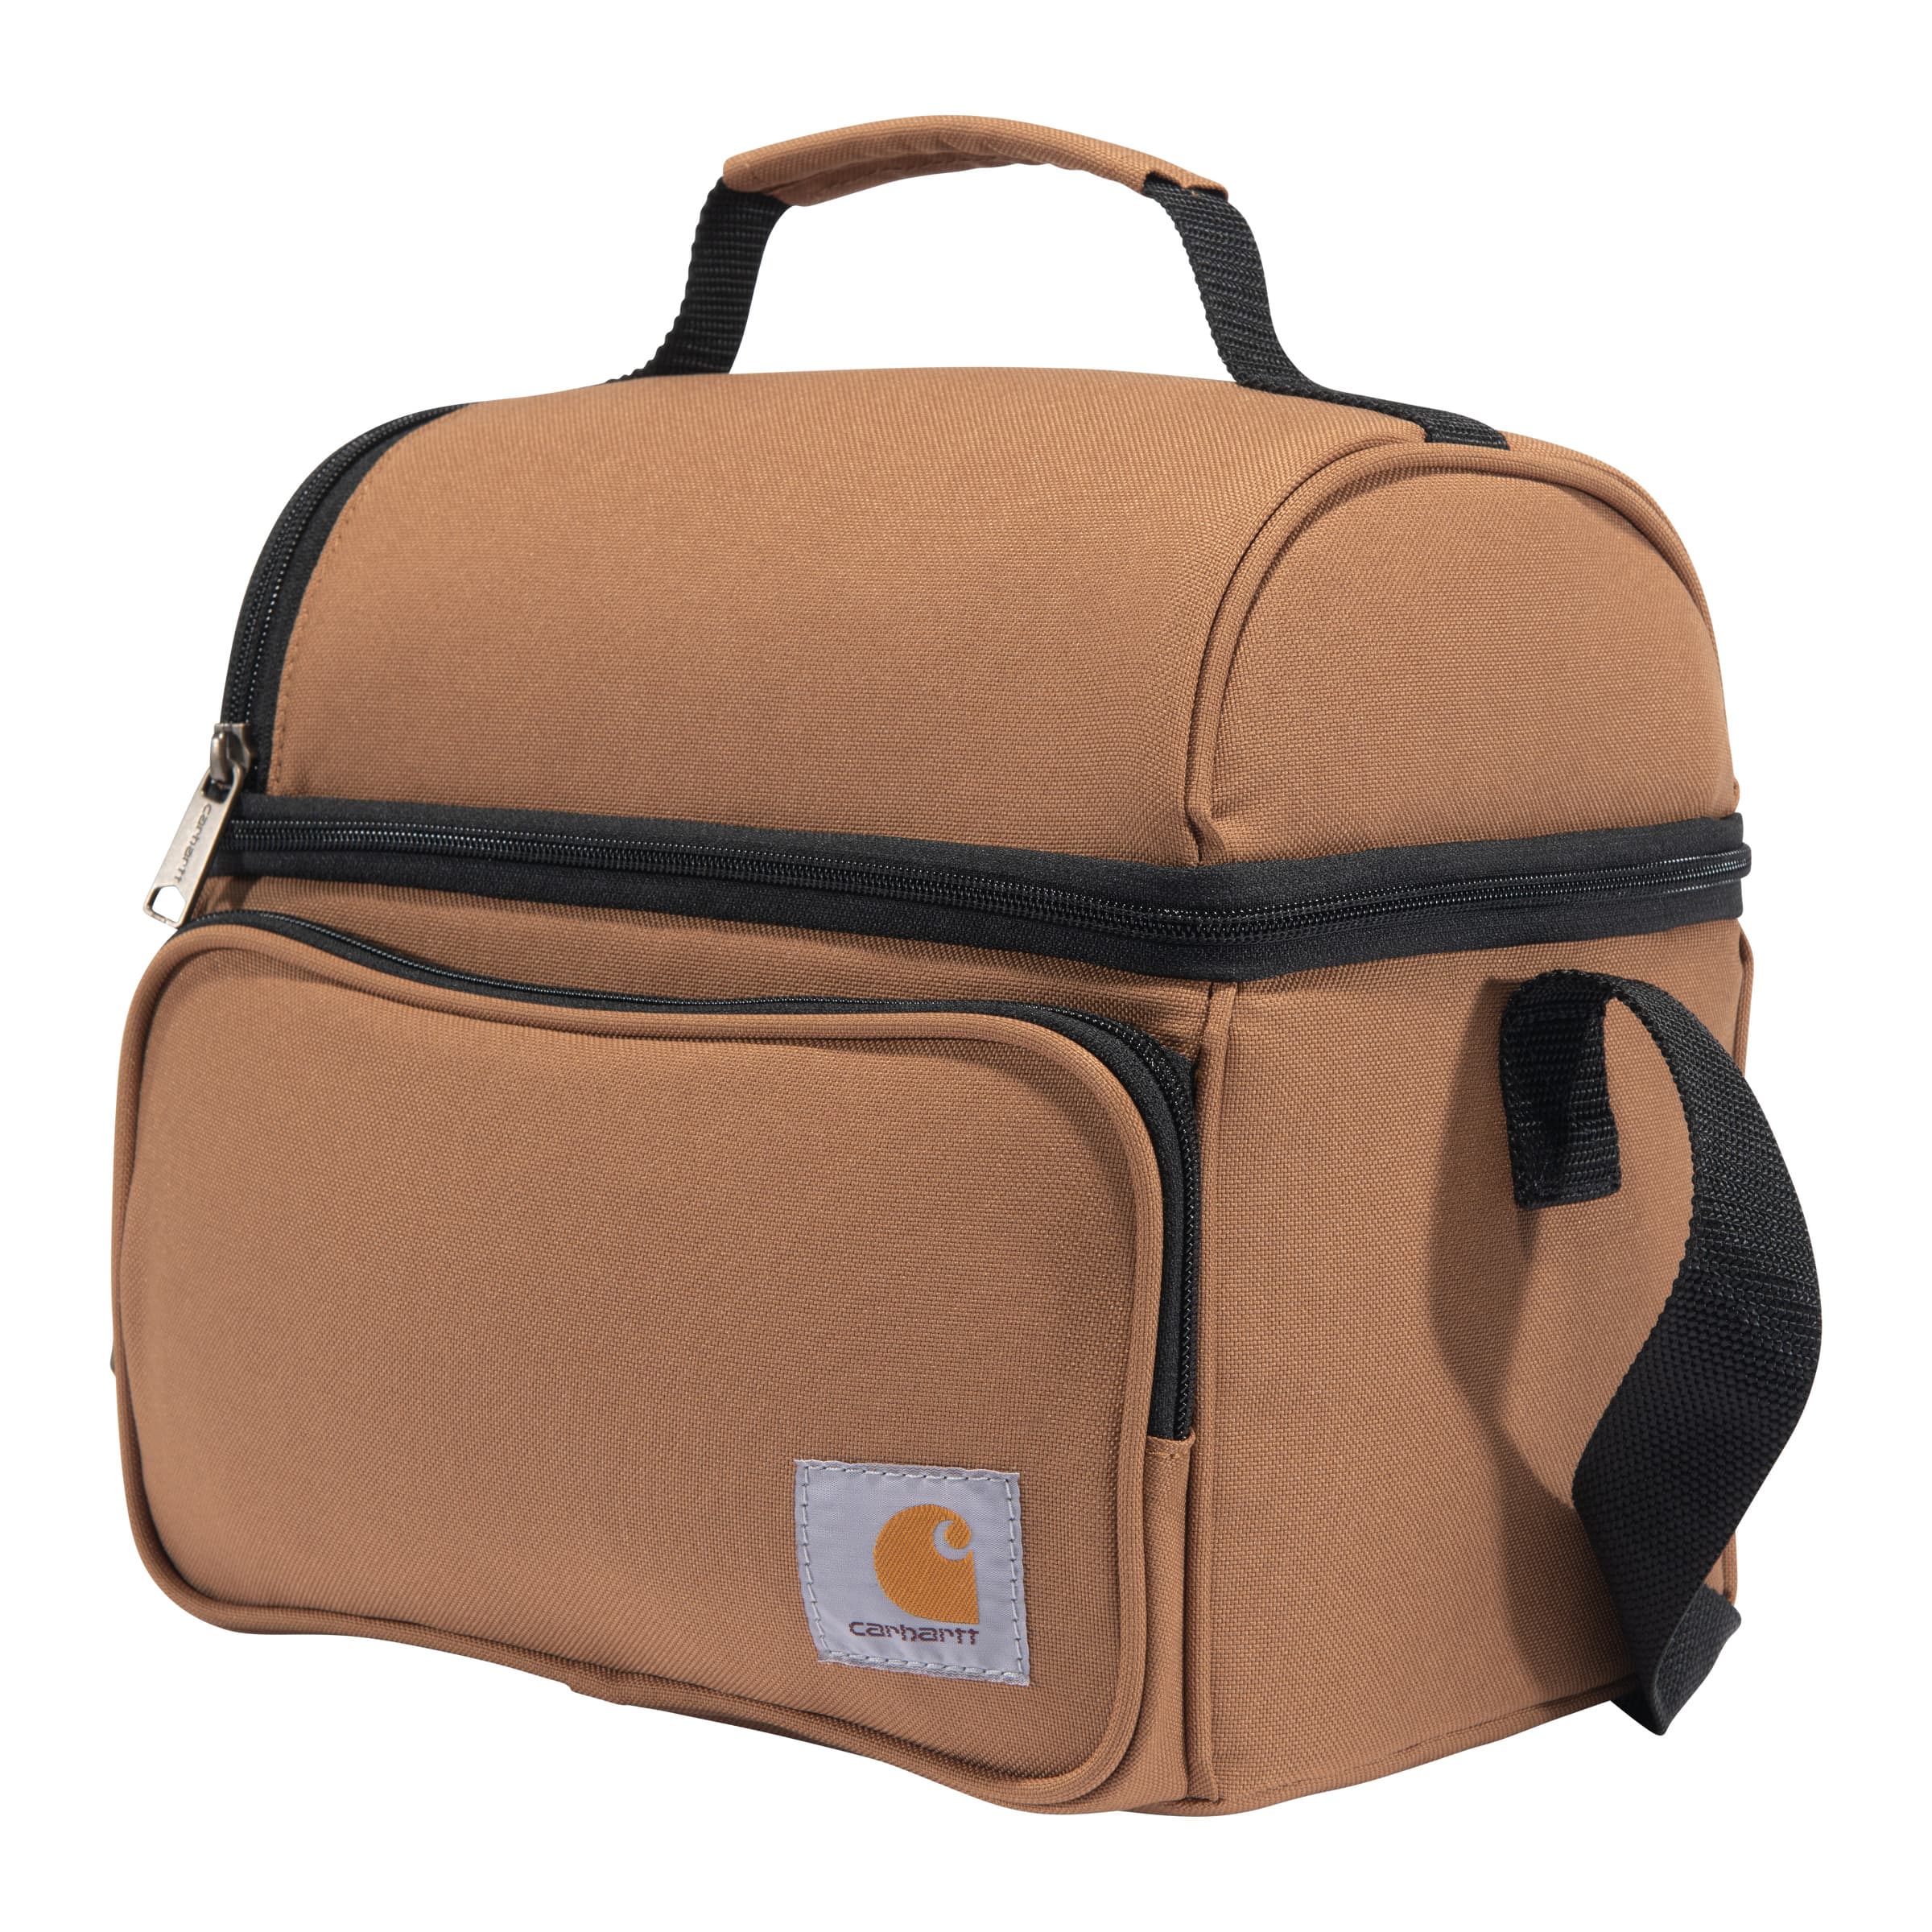 Carhartt® Insulated 12-Can 2-Compartment Lunch Cooler - Carhartt Brown